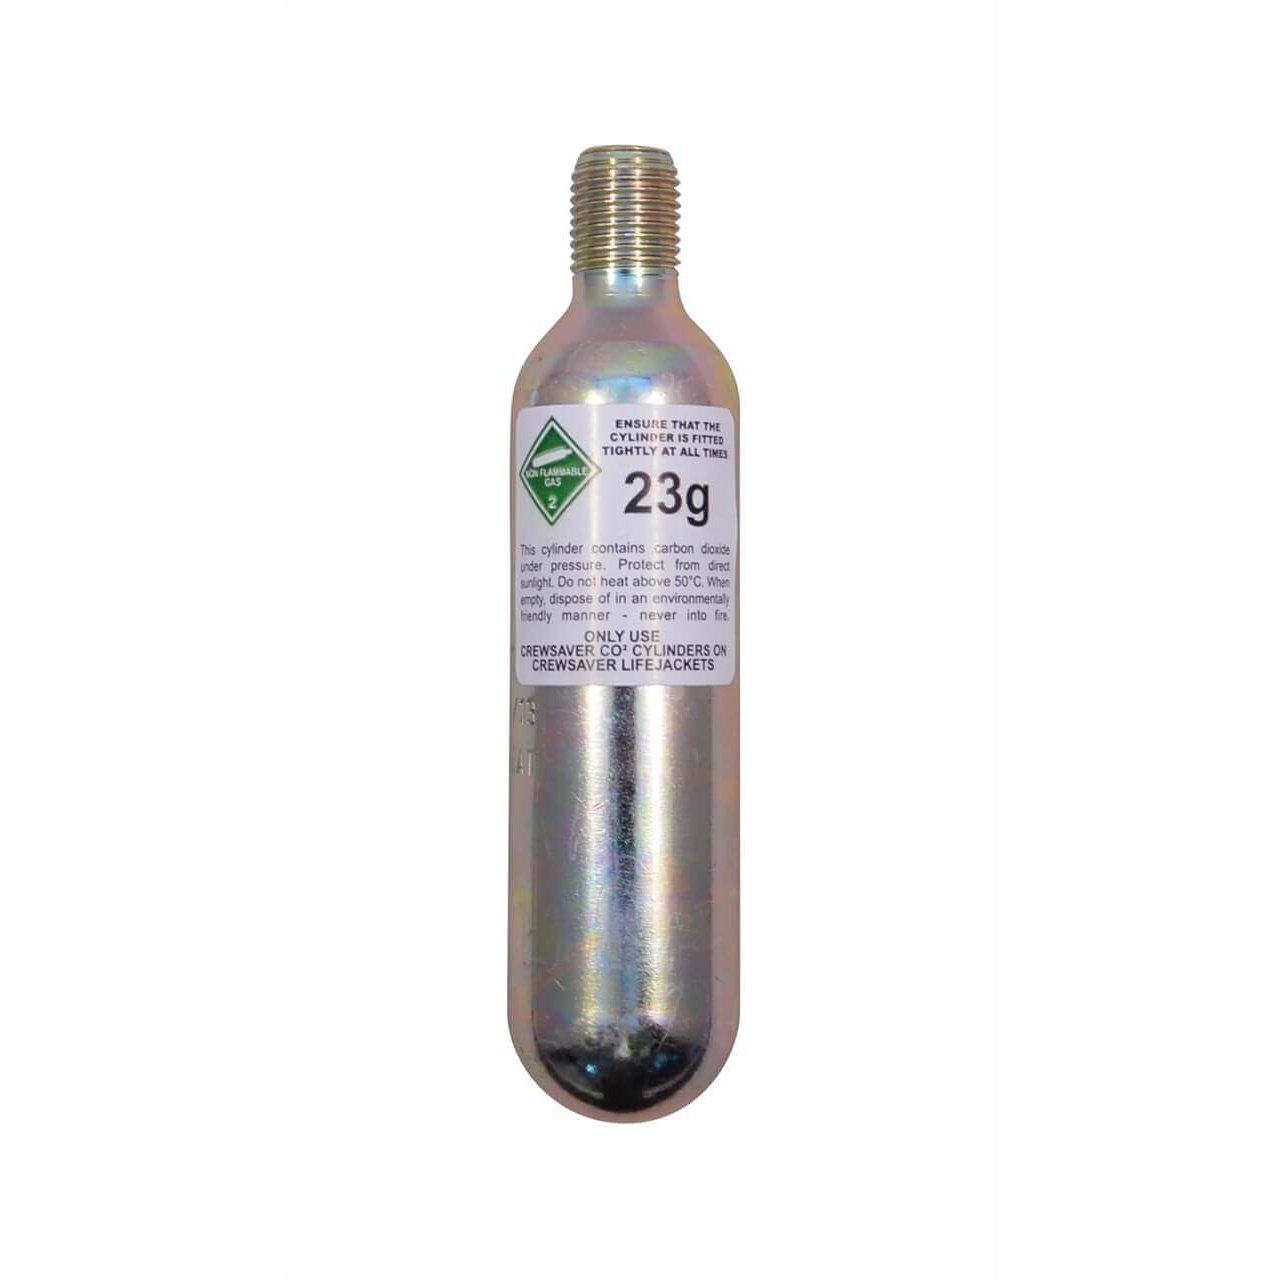 Crewsaver Replacement CO2 Cylinders - 23g Junior